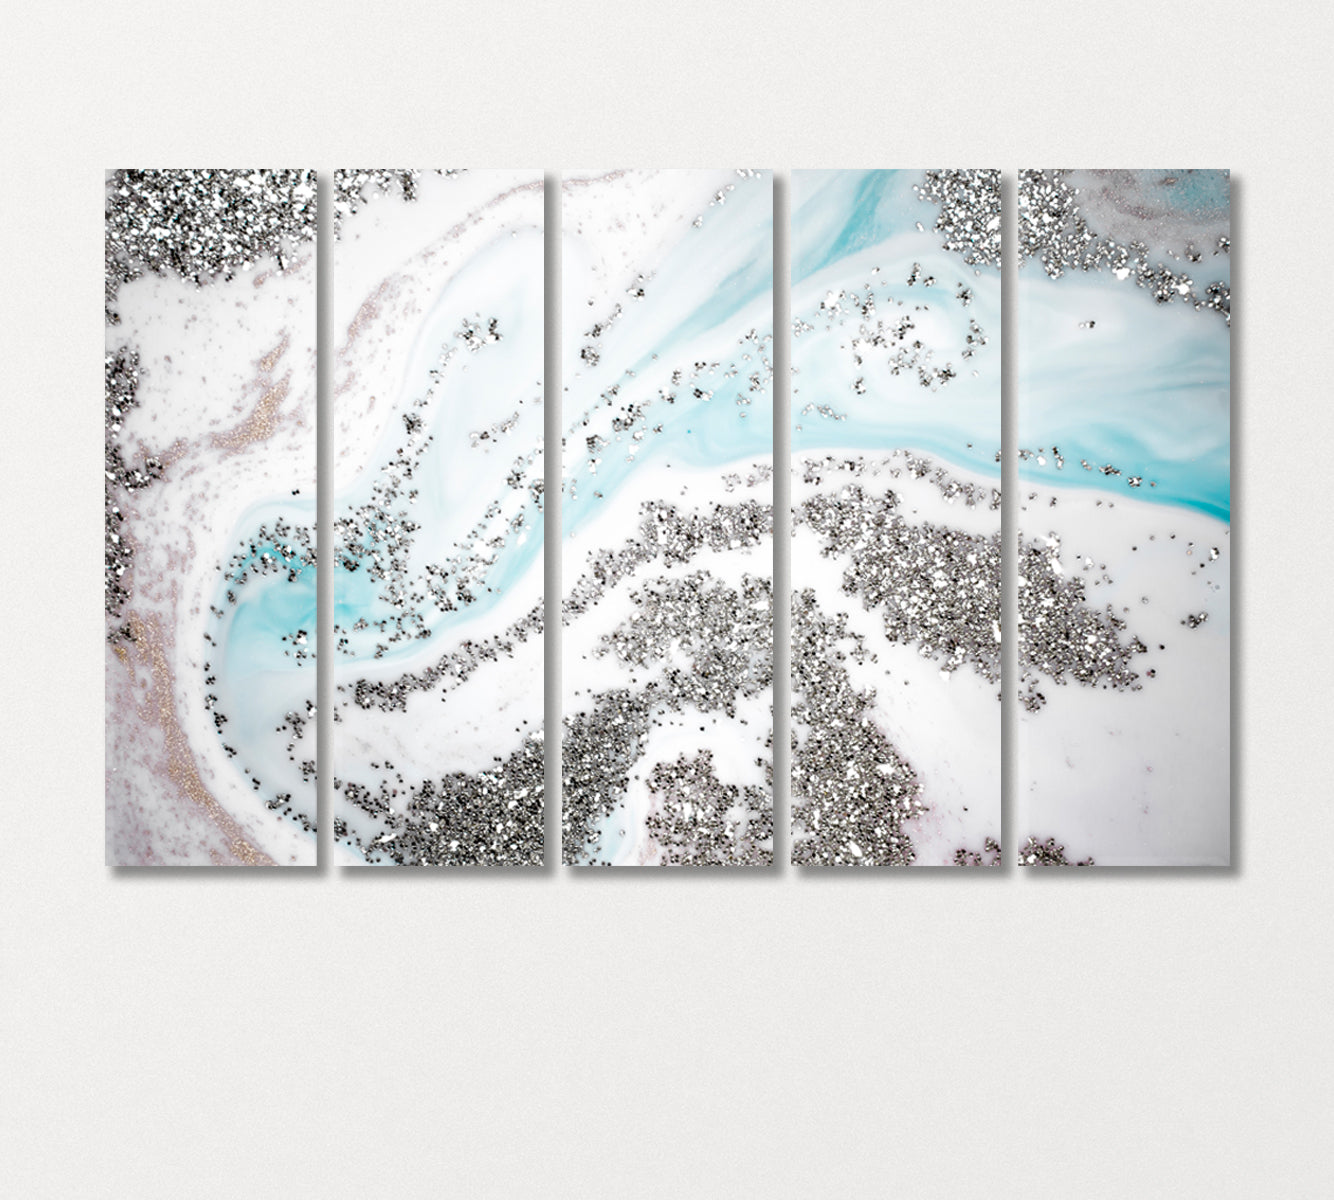 Abstract Liquid Marble in Pastel Colors Canvas Print-Canvas Print-CetArt-5 Panels-36x24 inches-CetArt